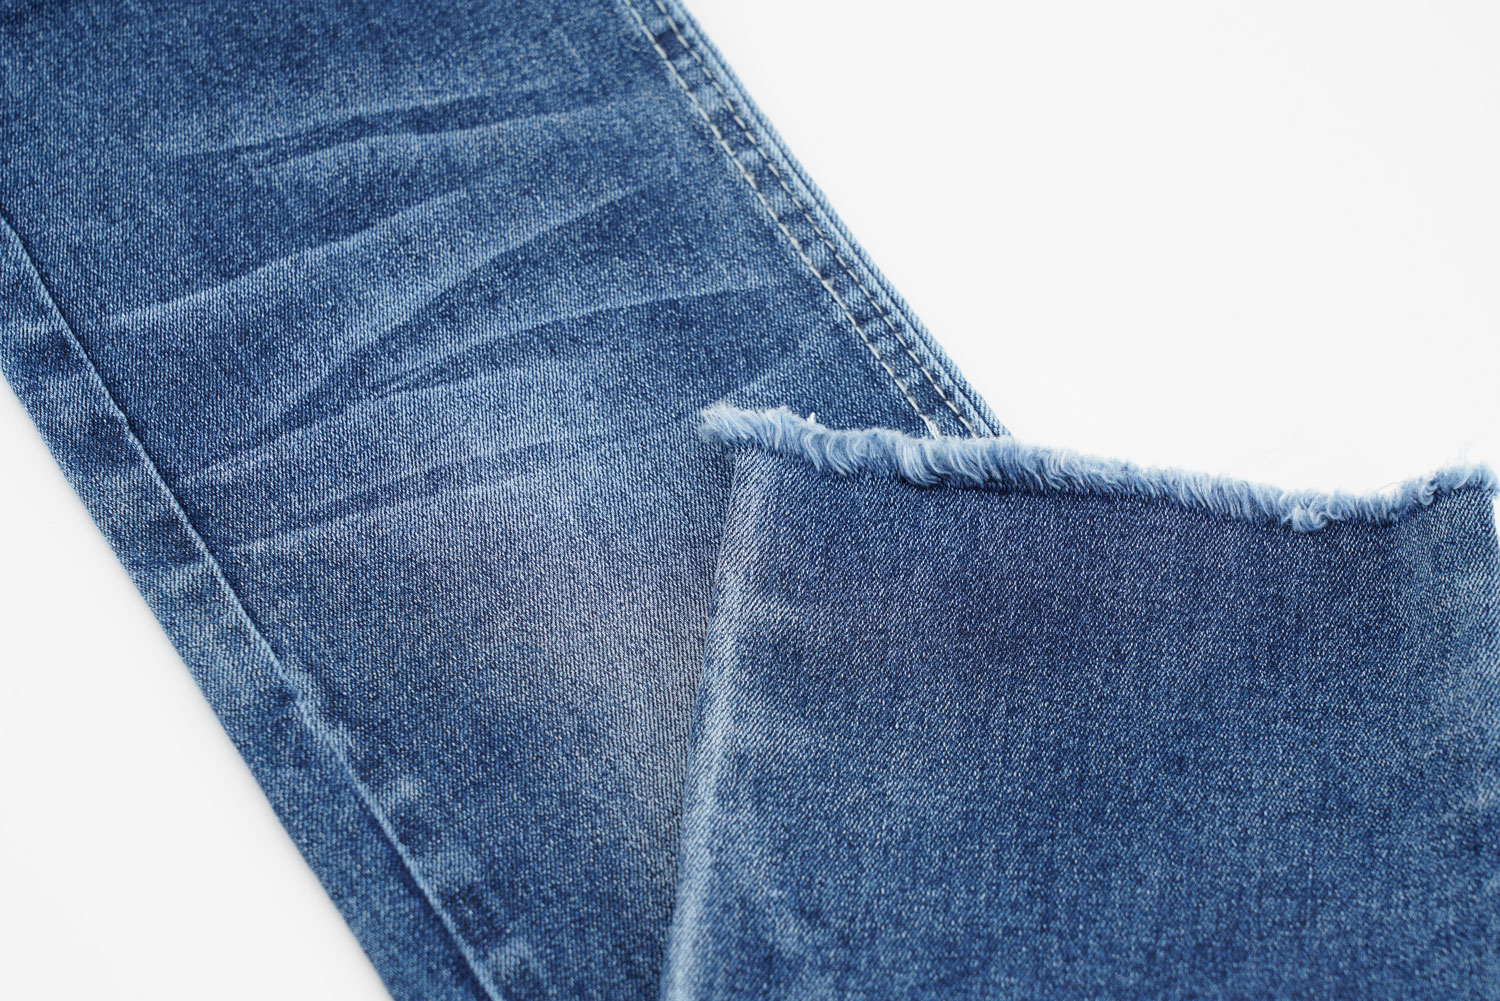 Tips to Help You Design the Perfect Stretch Denim Material for That Party 1